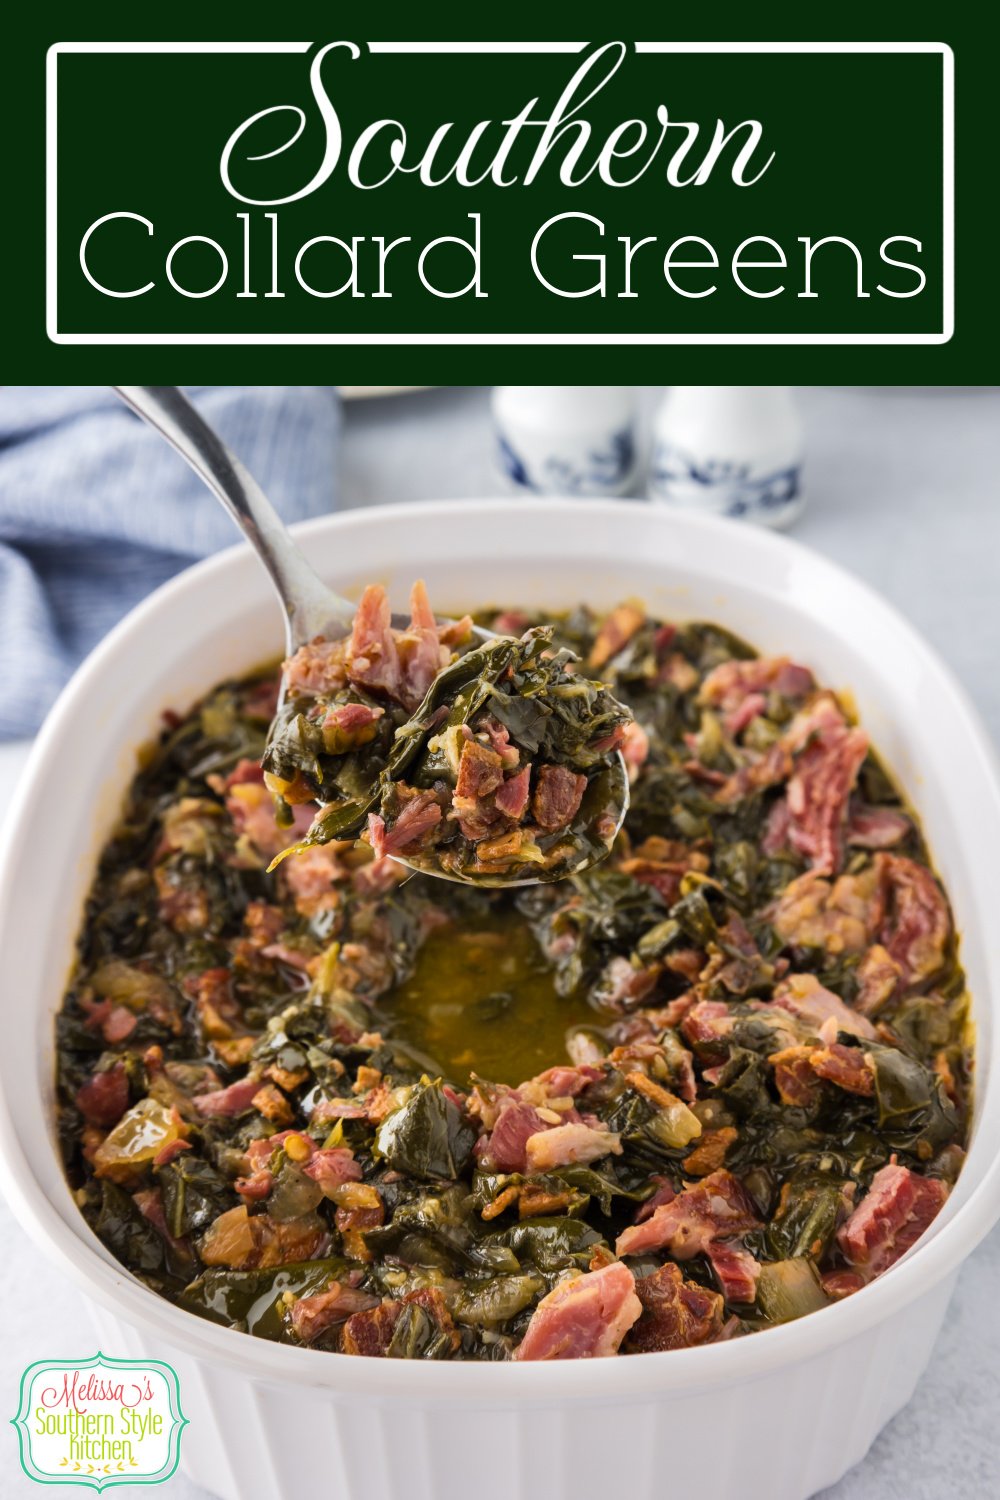 This Southern Collard Greens Recipe features tender flavorful greens cooked with bacon and onion and seasoned with smoked ham hocks. #greens #newyearsdayrecipes #southerngreens #southerncollardgreens #turnipgreens #easygreensrecipe #hamhocks via @melissasssk